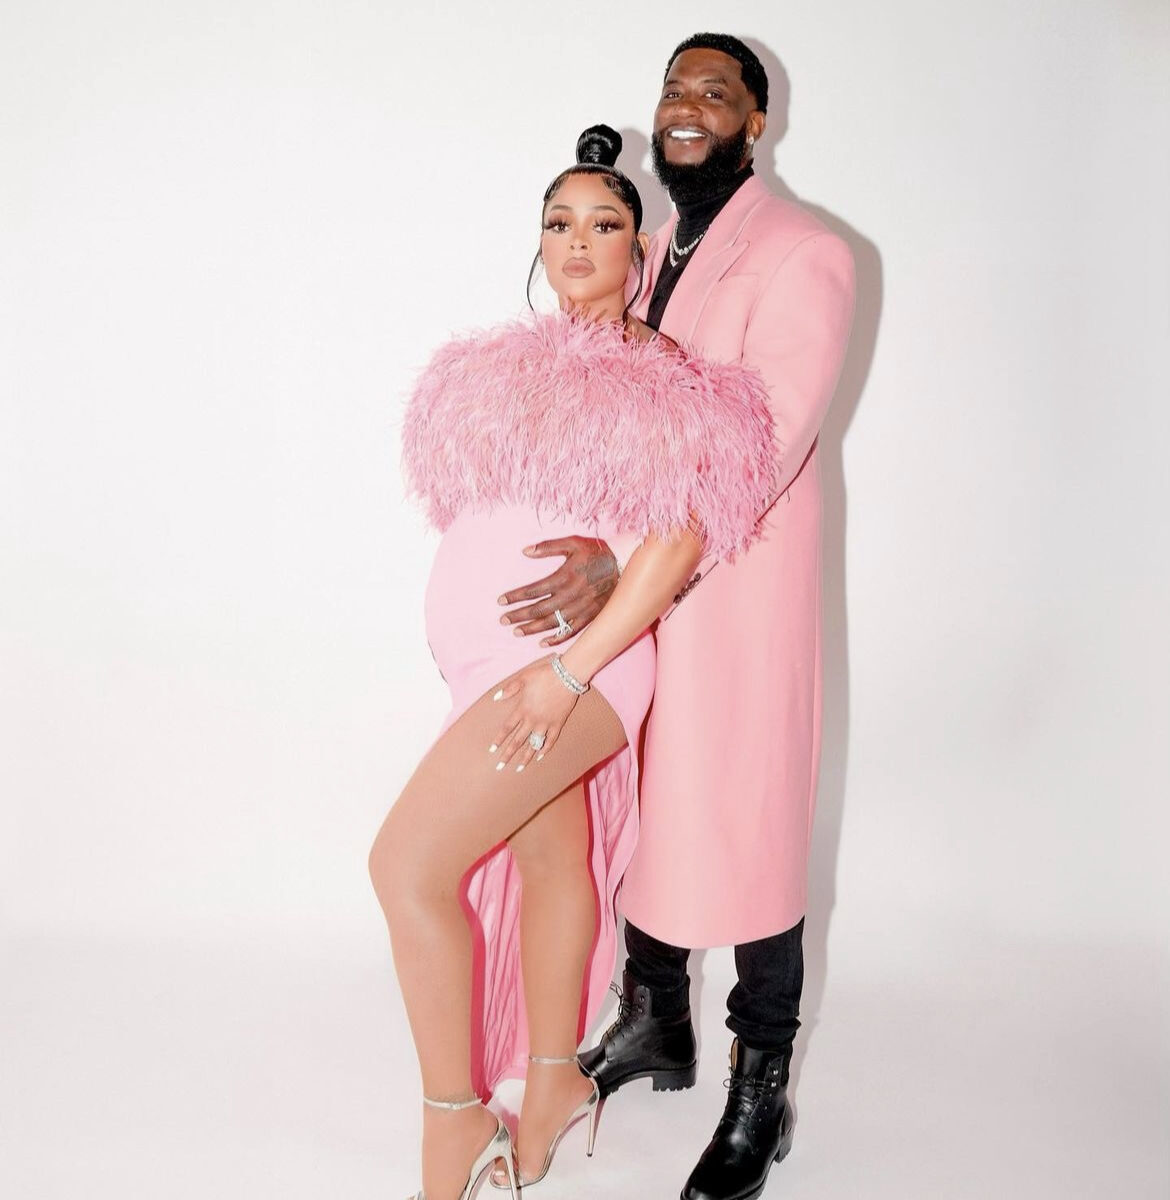 Keyshia Ka'oir And Gucci Mane Are Expecting Their Second Child